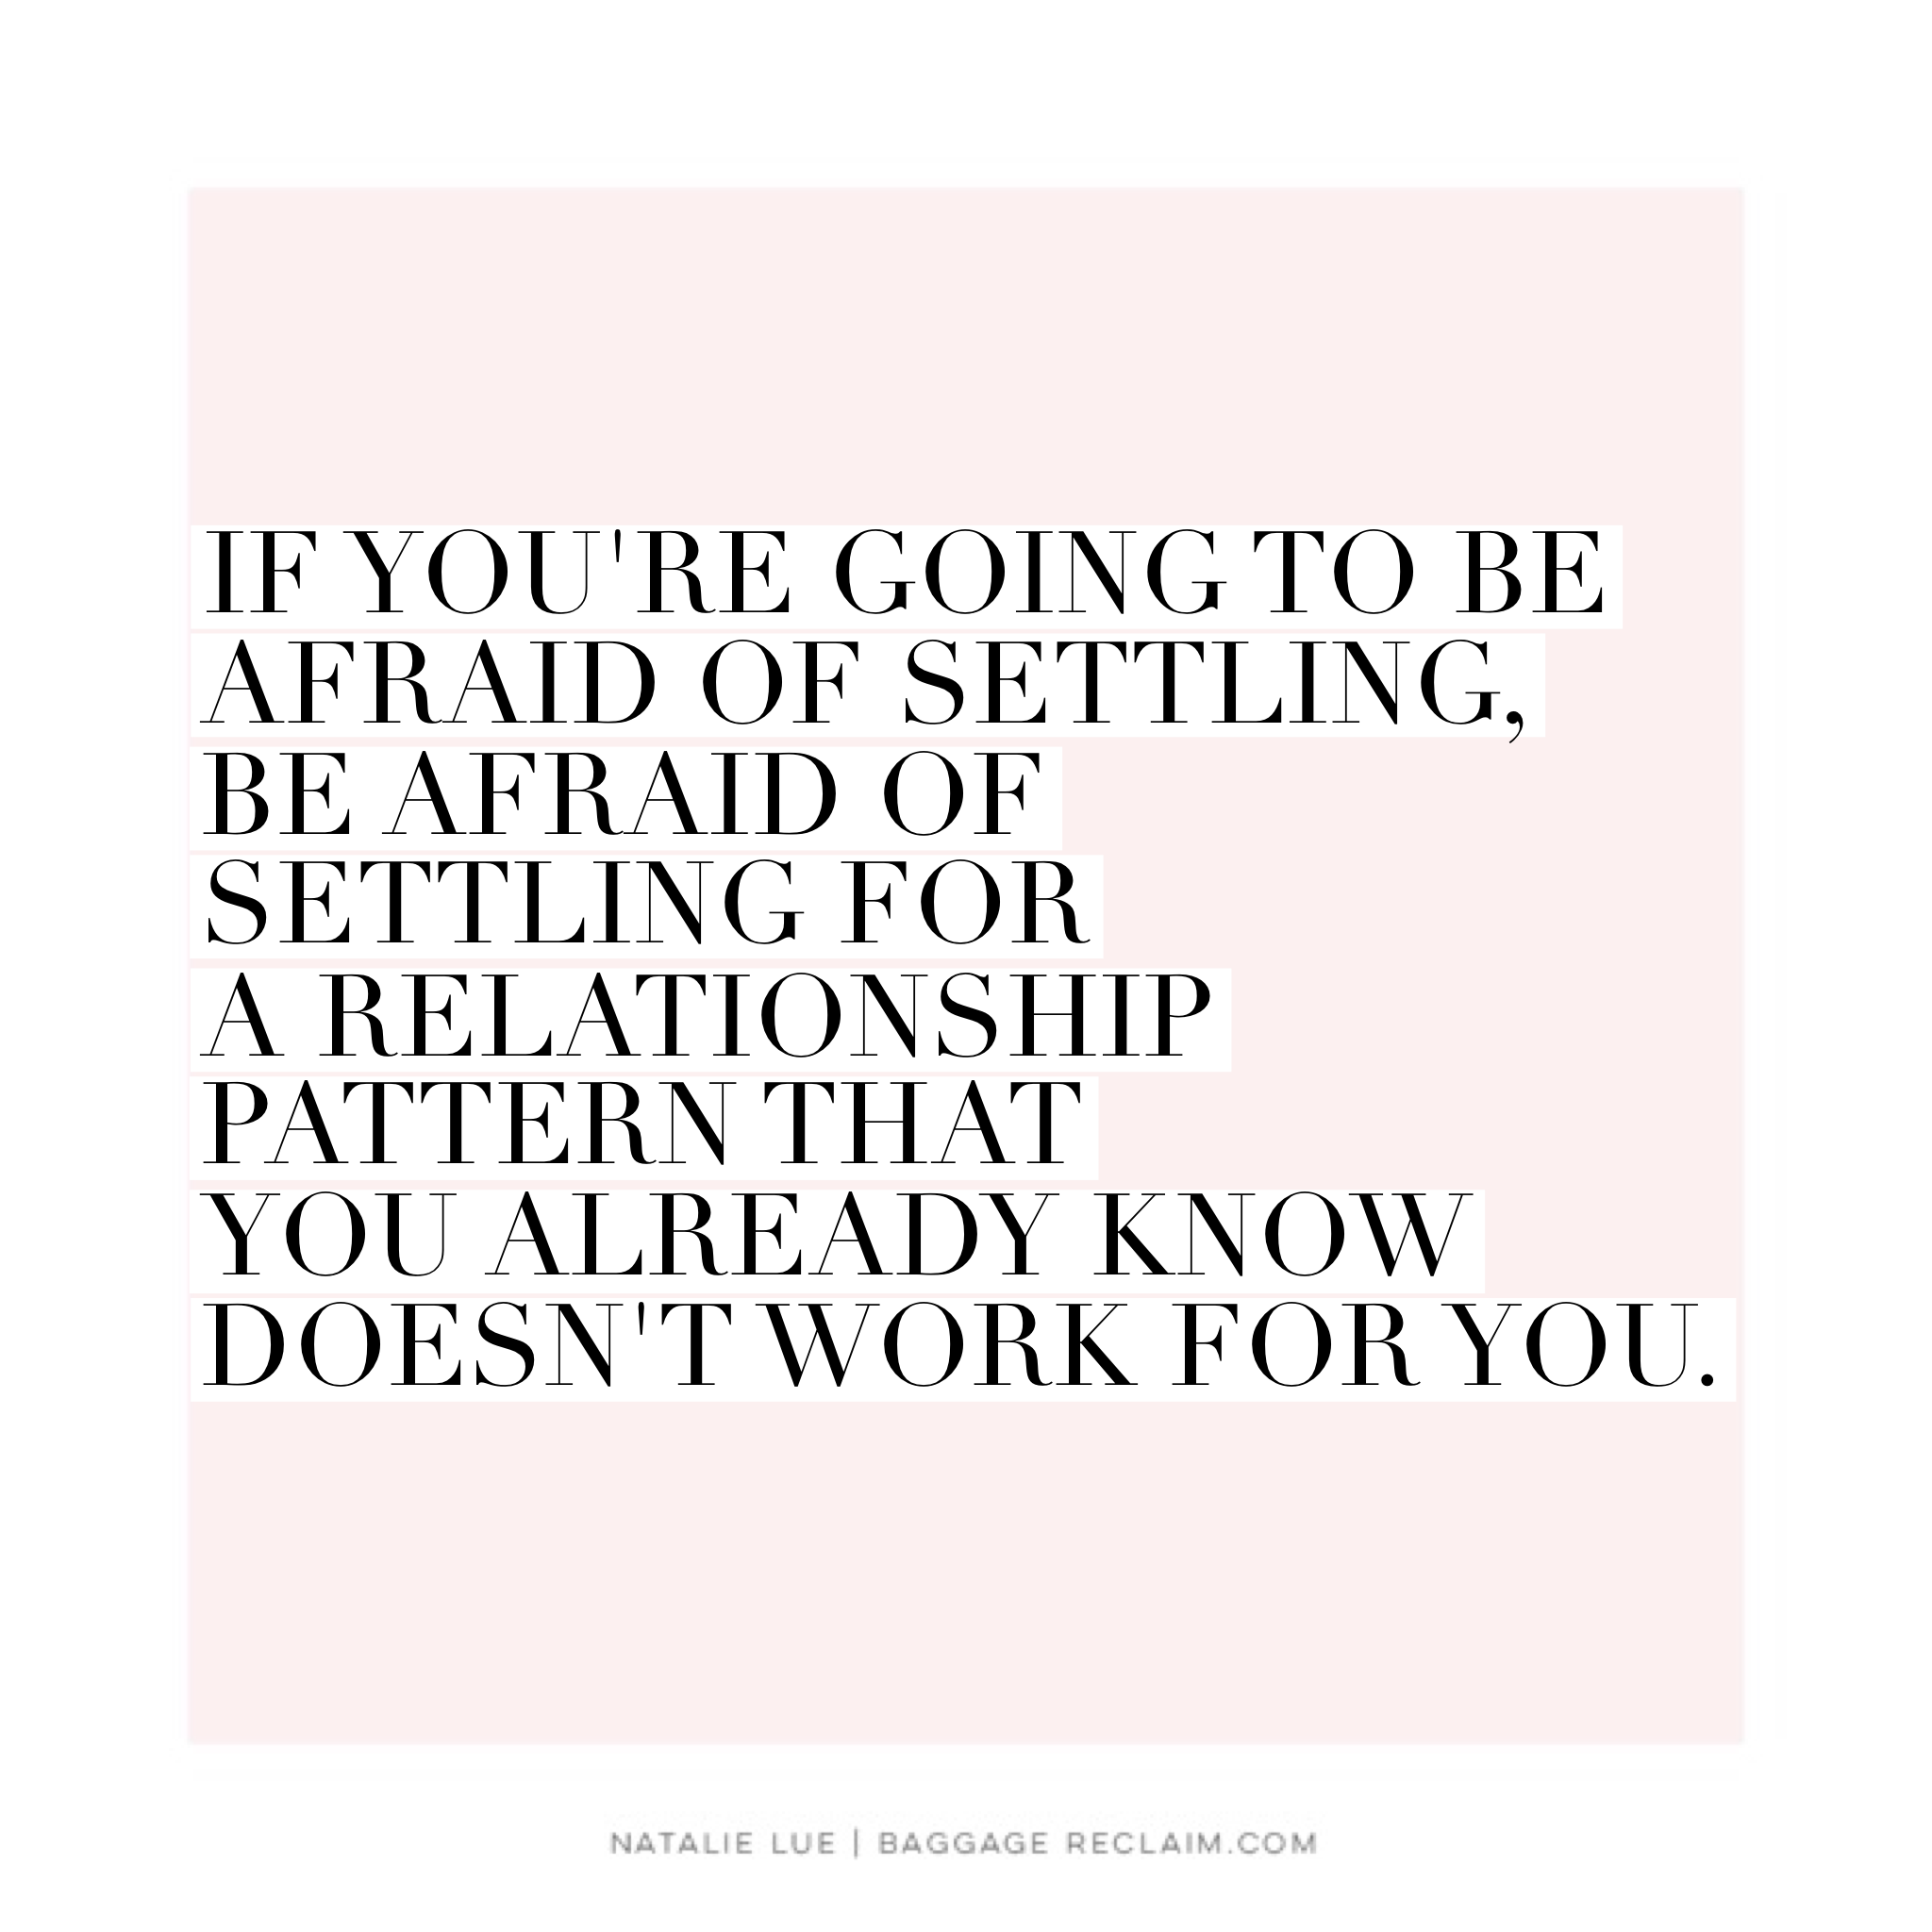 If you're going to be afraid of settling, be afraid of settling for a relationship pattern that you already know doesn't work for you.